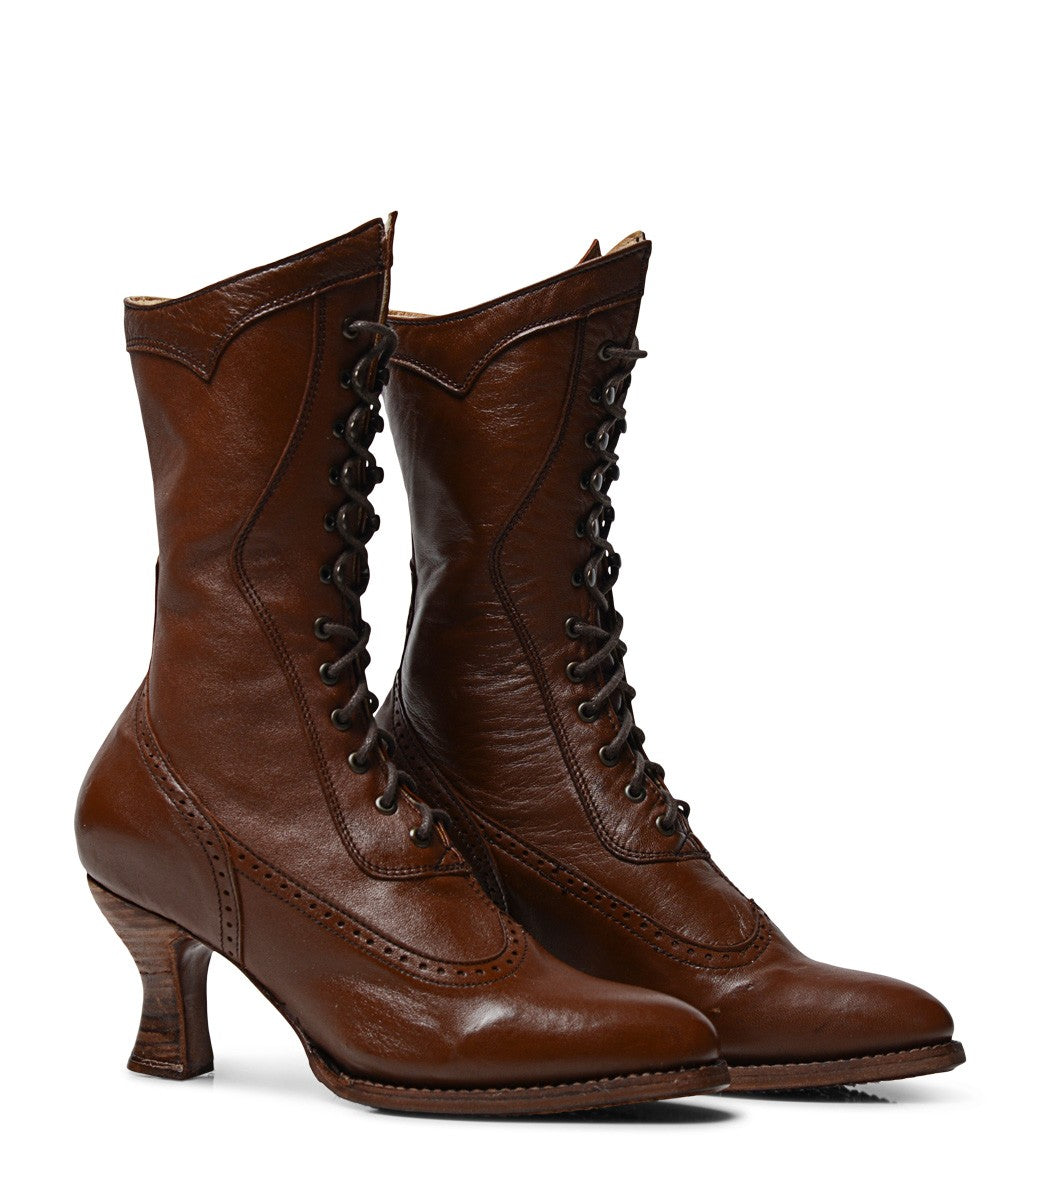 Modern Victorian Style Lace Up Leather Boots - 6 1/2